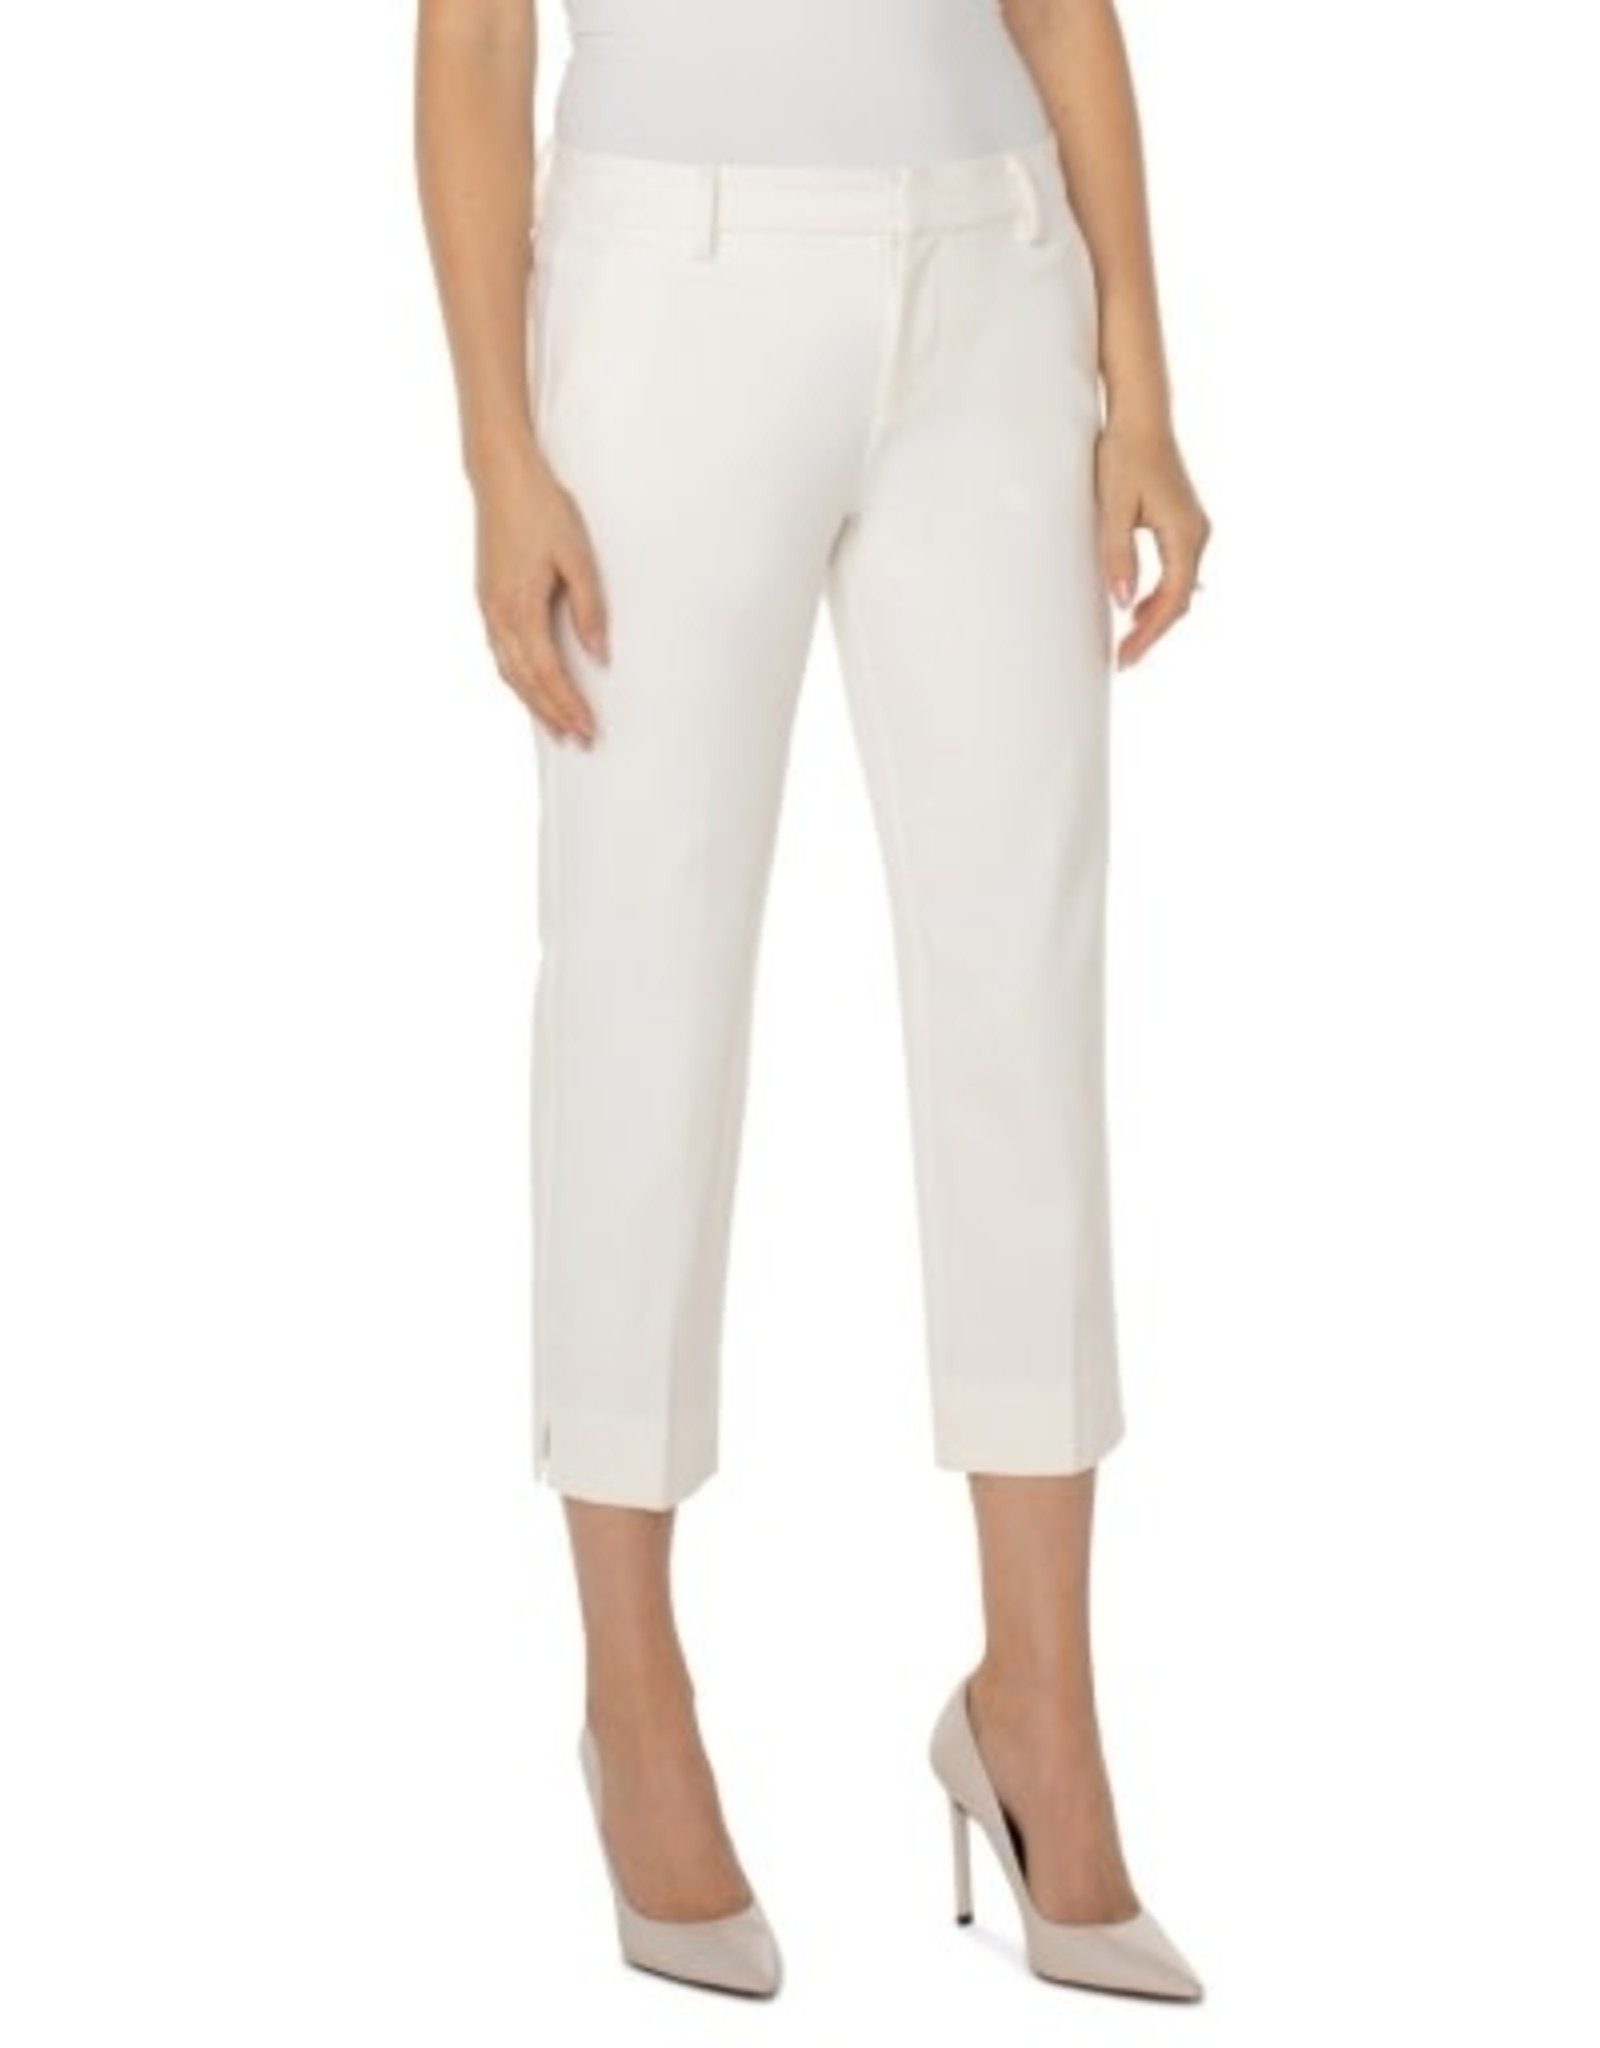 Liverpool Los Angeles Kelsey Knit Crop Trouser with Slit 26in Inseam